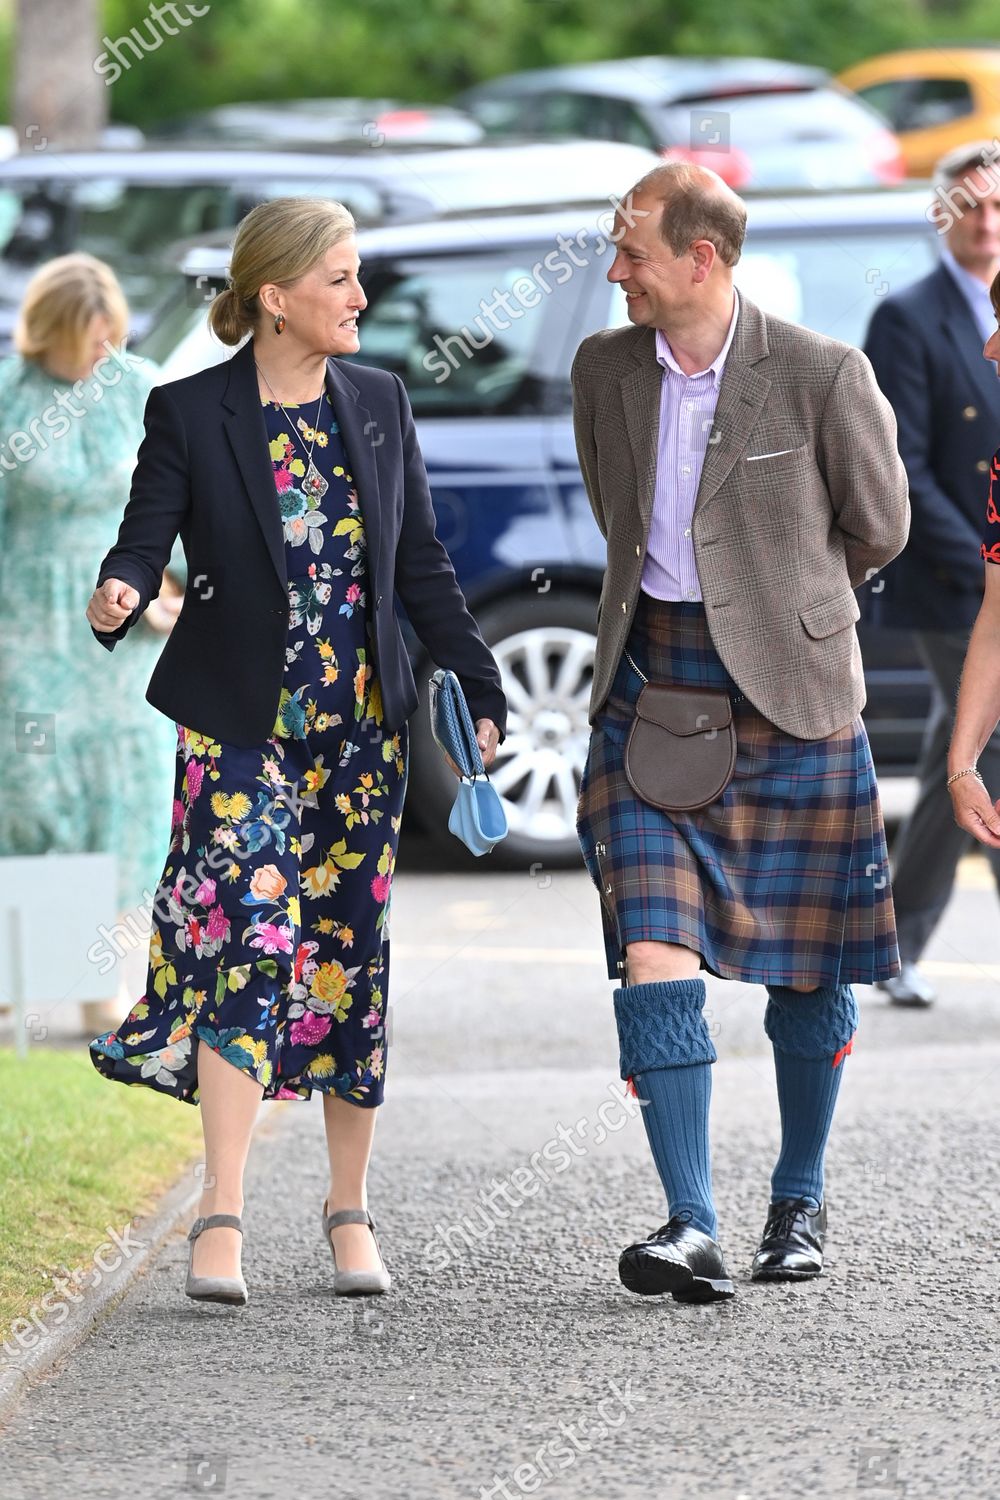 prince-edward-and-sophie-countess-of-wessex-visit-to-forfar-golf-club-scotland-uk-shutterstock-editorial-12172307l.jpg